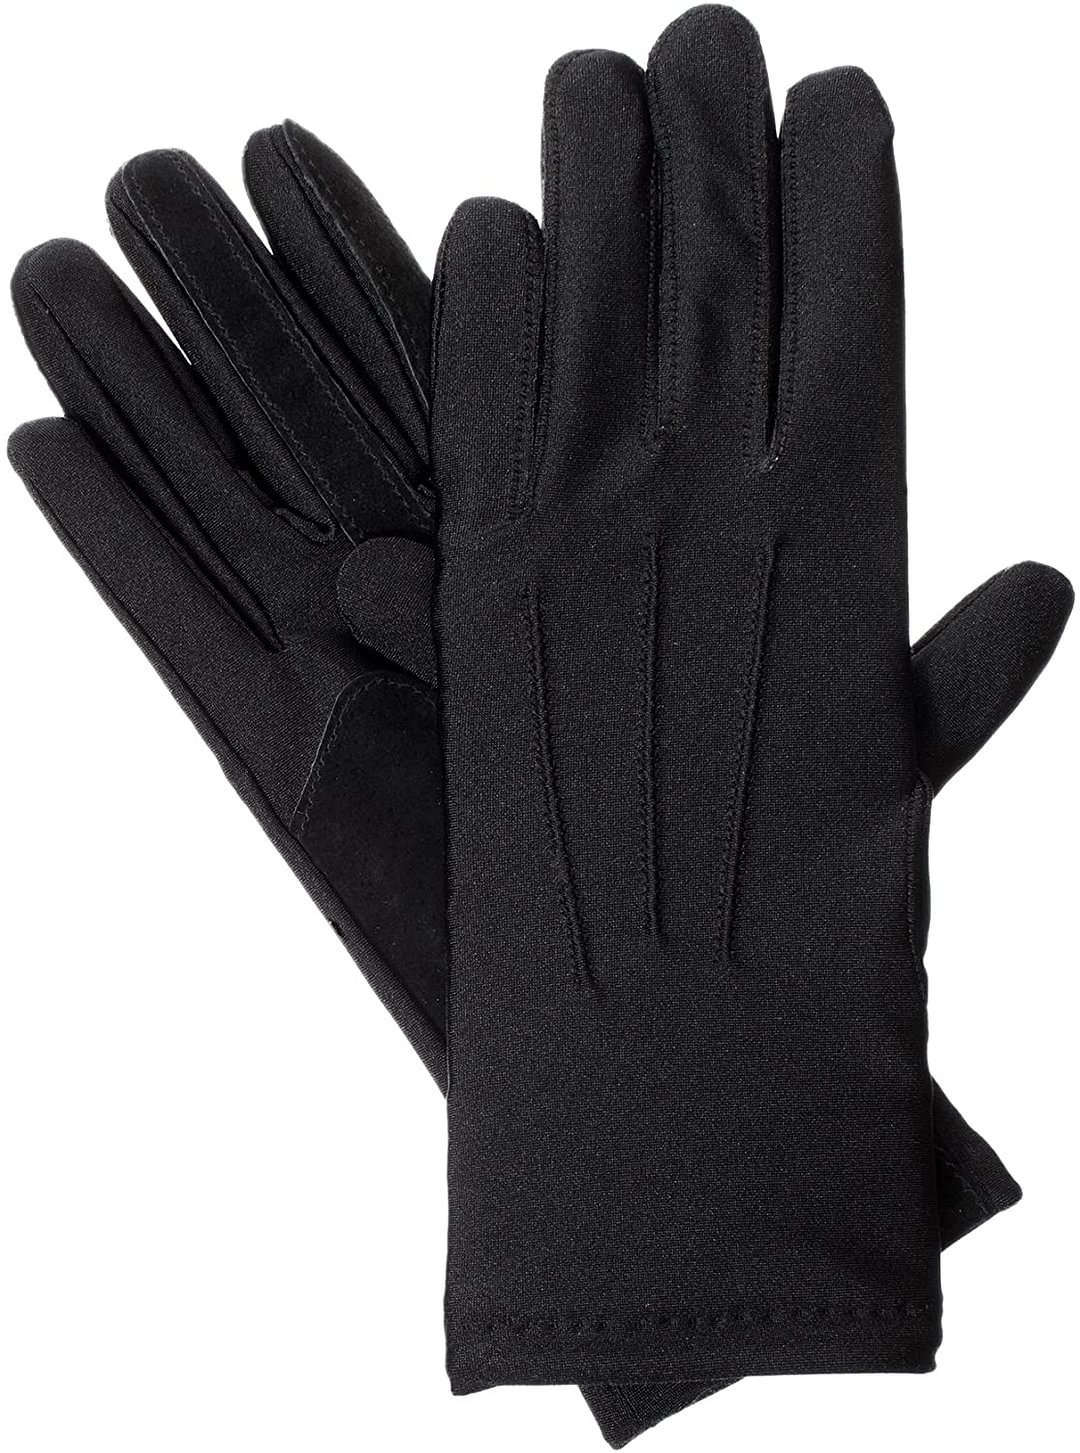 Women’s Spandex Cold Weather Stretch Gloves with Warm Fleece Lining